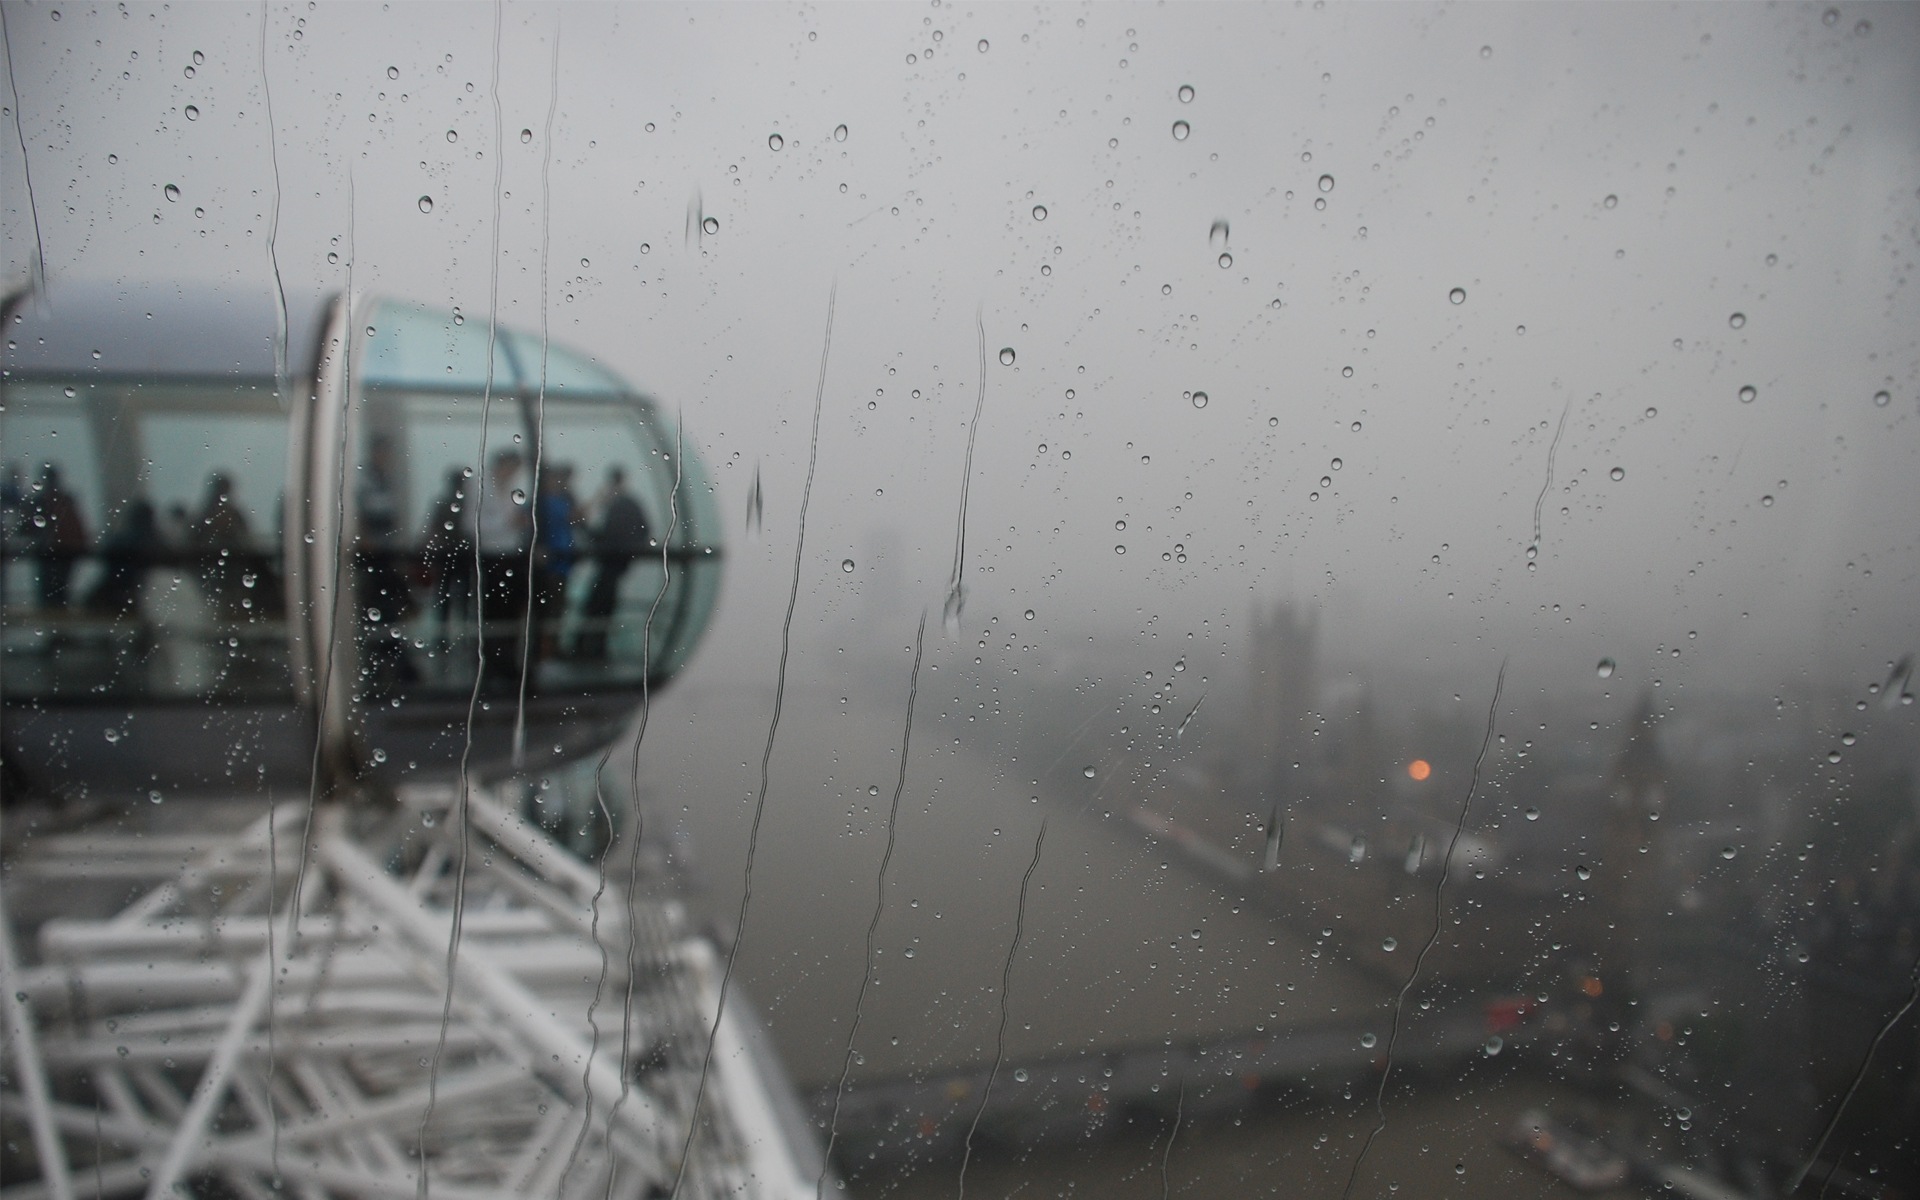 Rainy day in London, Thames River view.